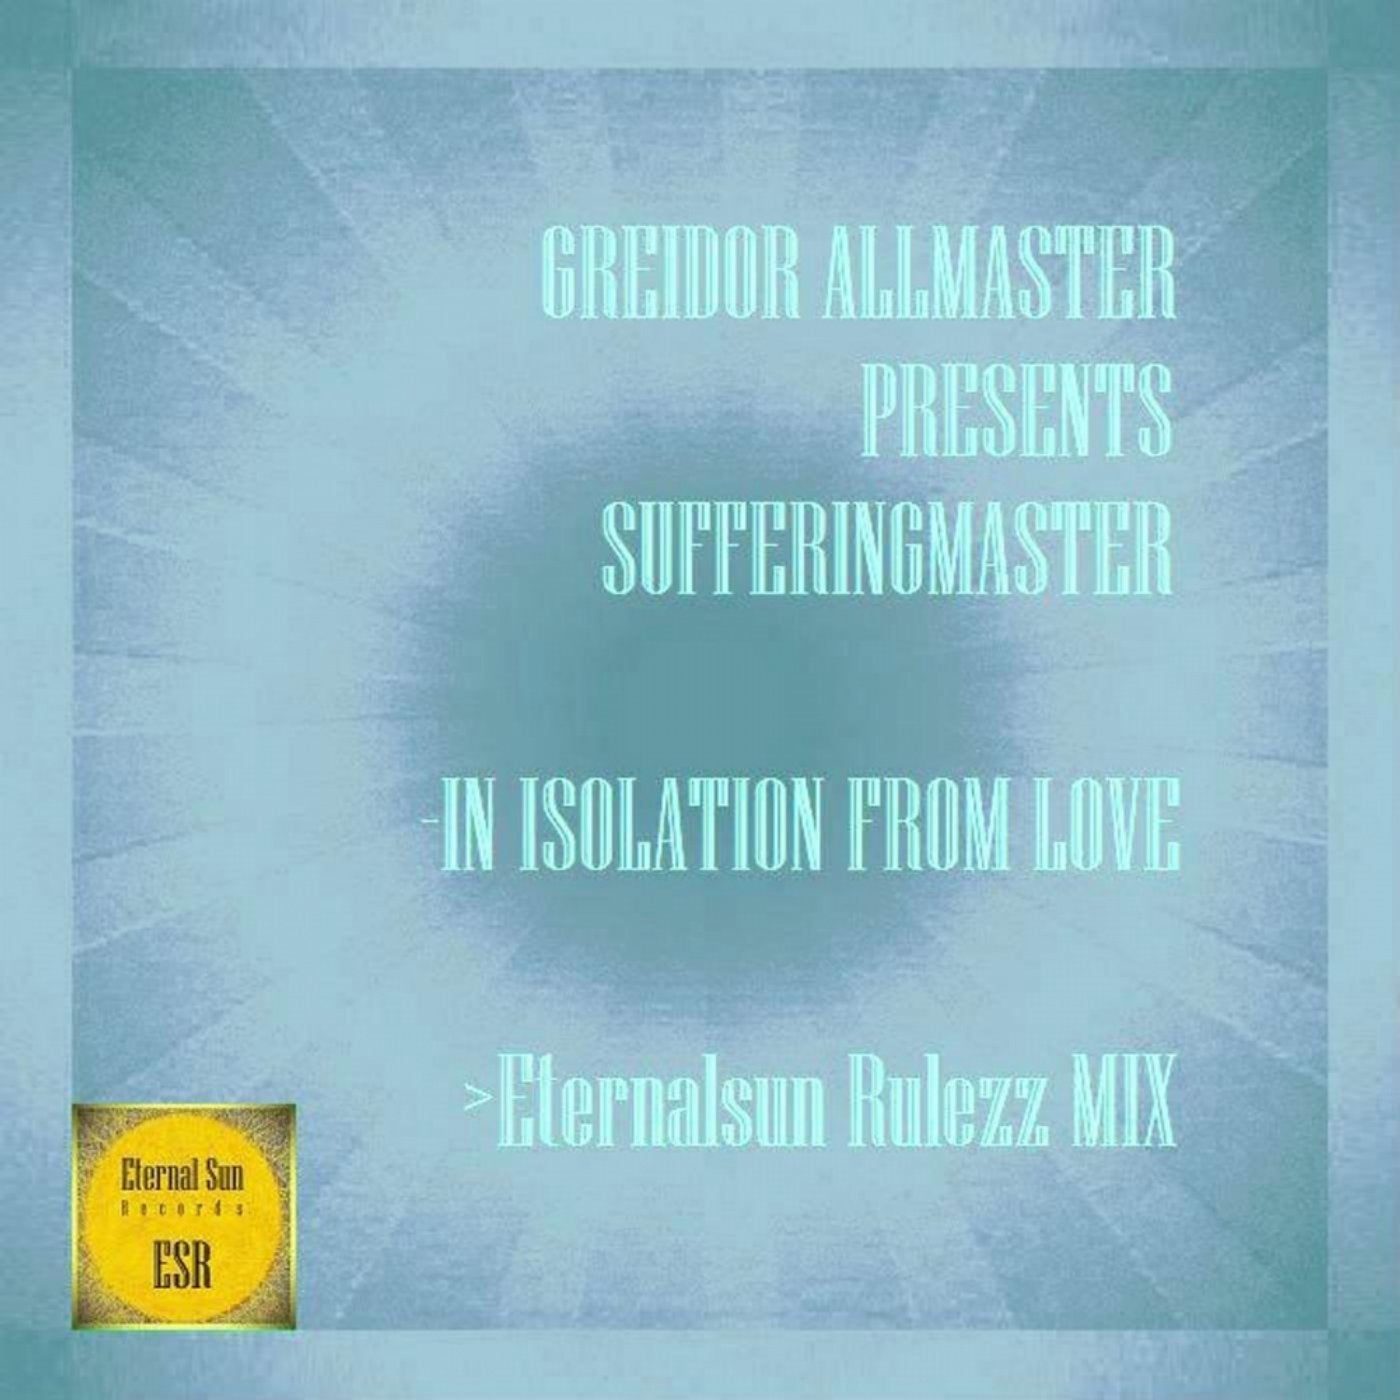 In Isolation From Love (Eternalsun Rulezz Mix)